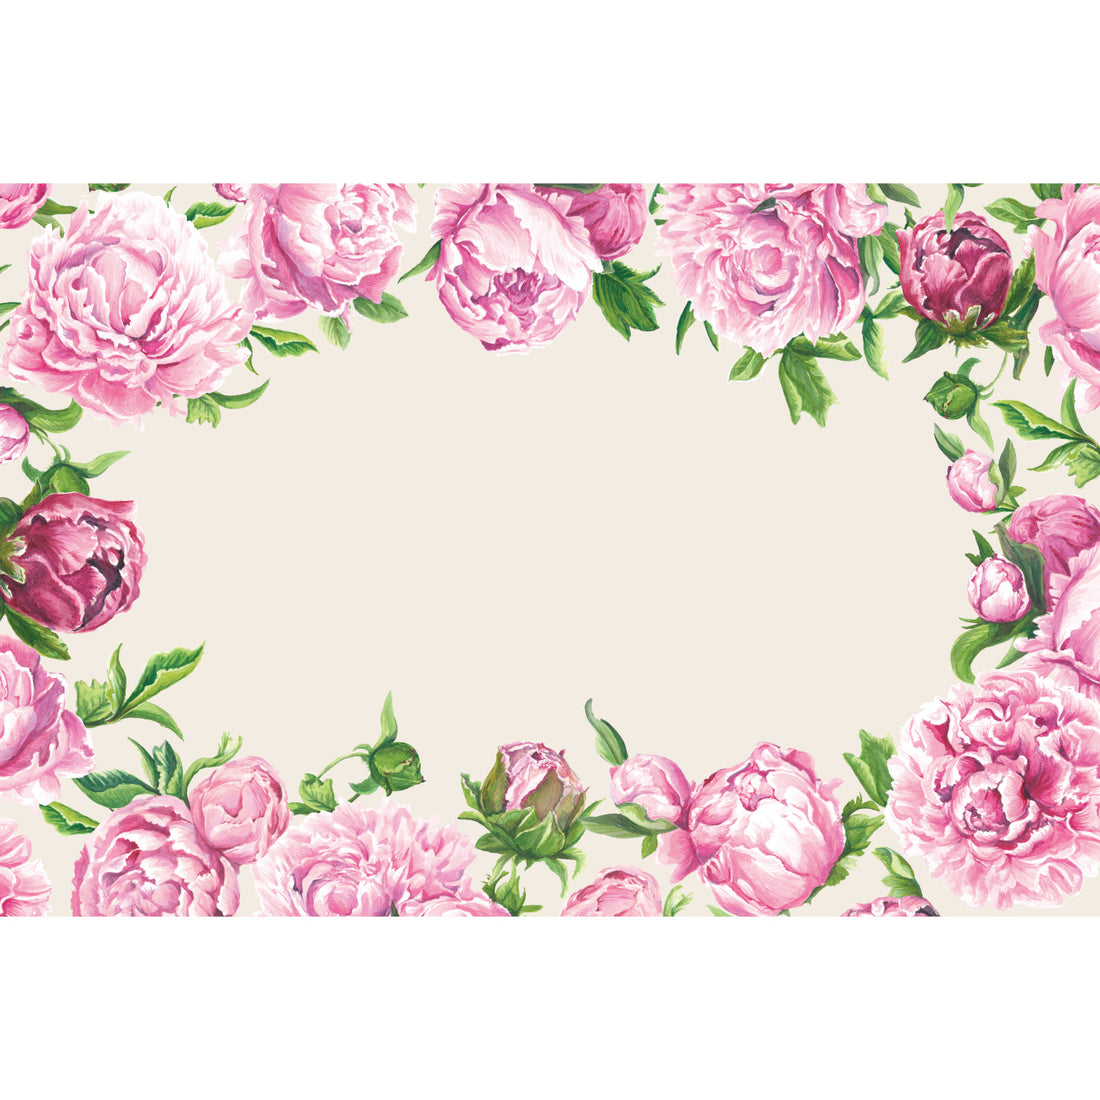 A wreath of illustrated pink peonies and green leaves on a cream background, surrounding a blank central area for a personal message.